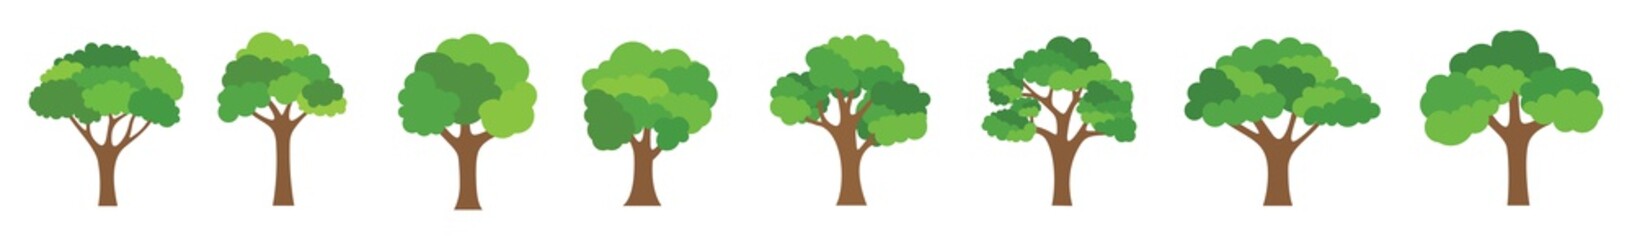 tree icon set. Tree collection isolated on white background, vector illustration